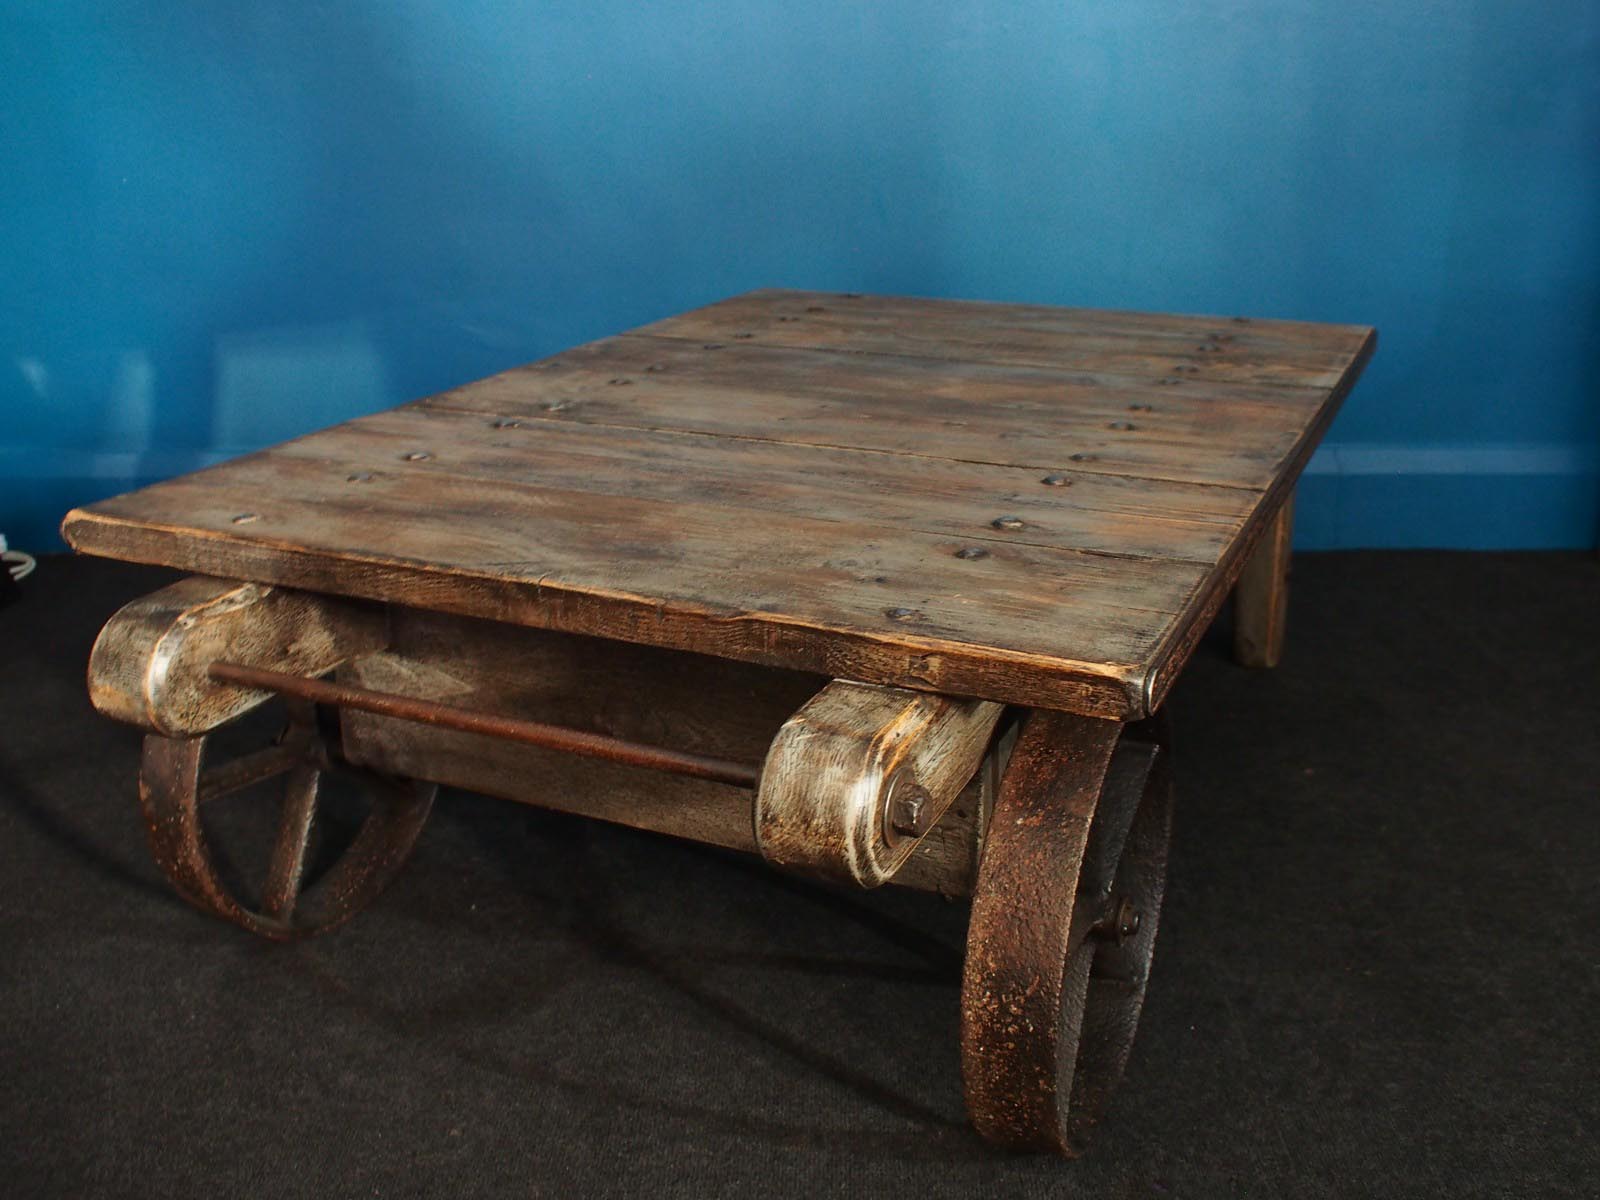 Rustic Wheels for Coffee Table